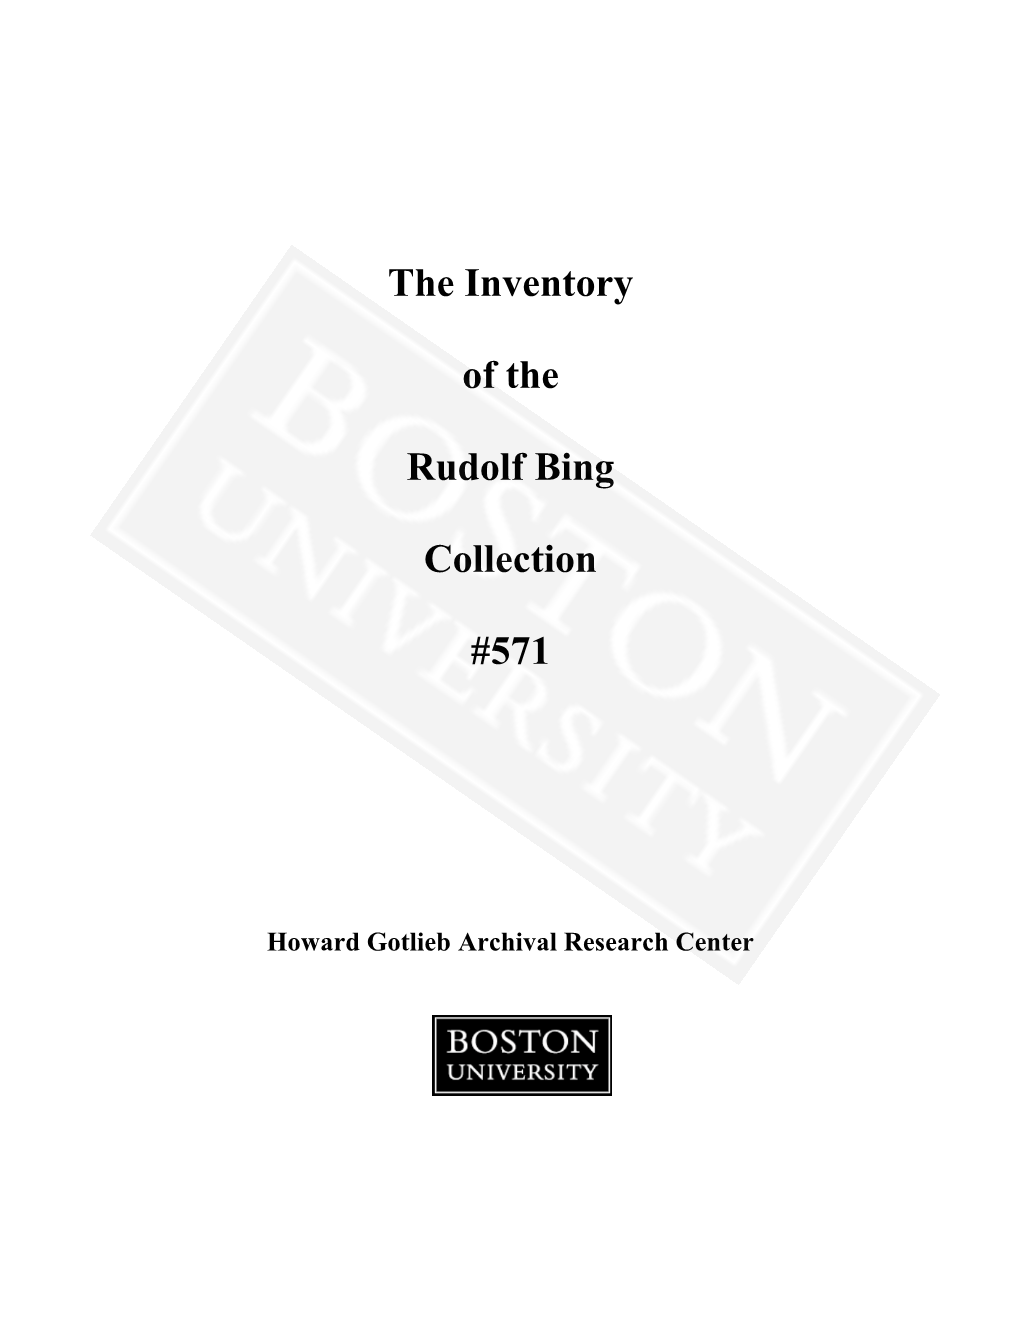 The Inventory of the Rudolf Bing Collection #571